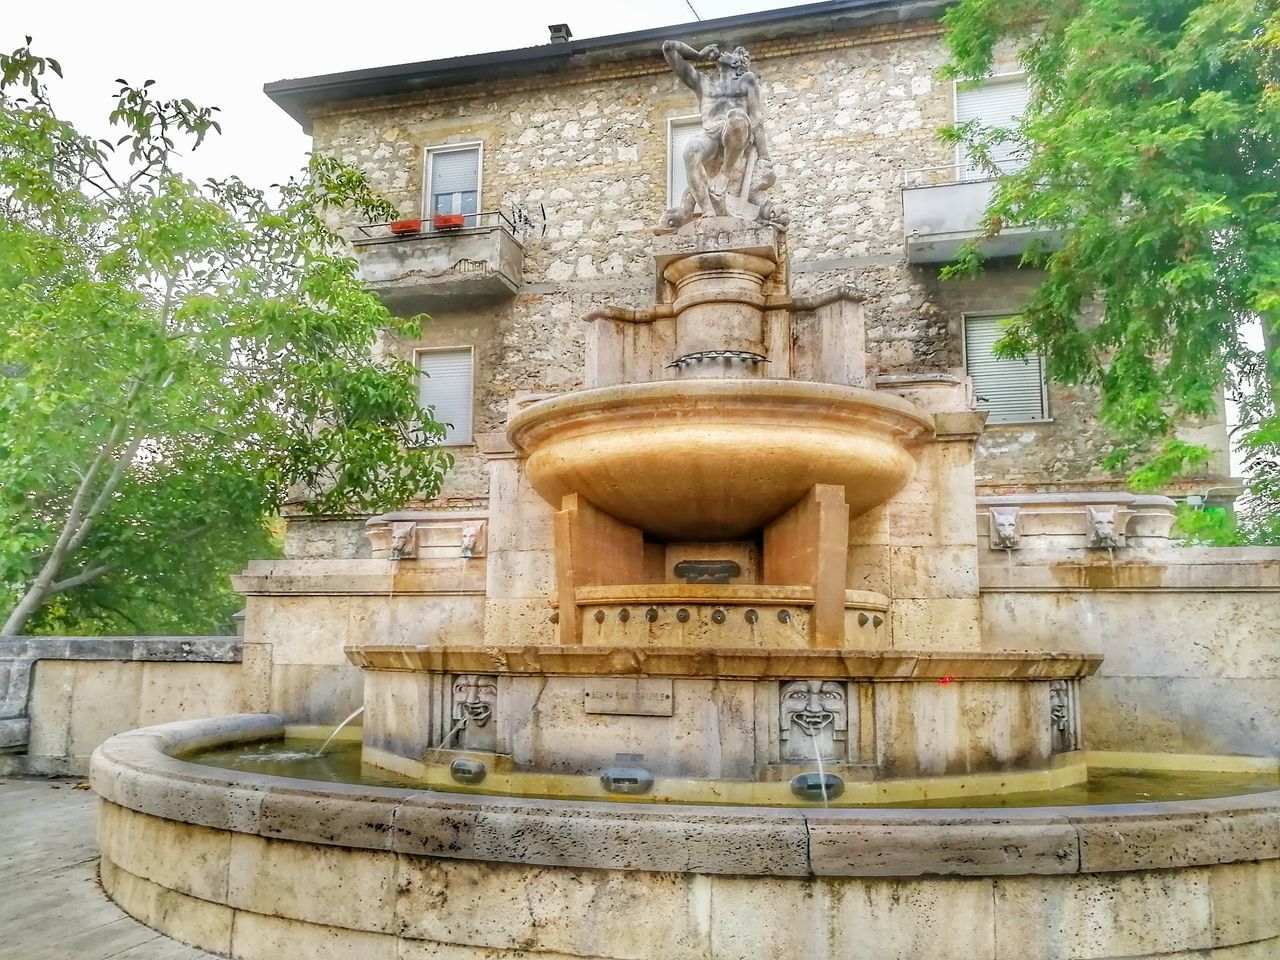 CLOSE-UP OF FOUNTAIN AGAINST BUILDING